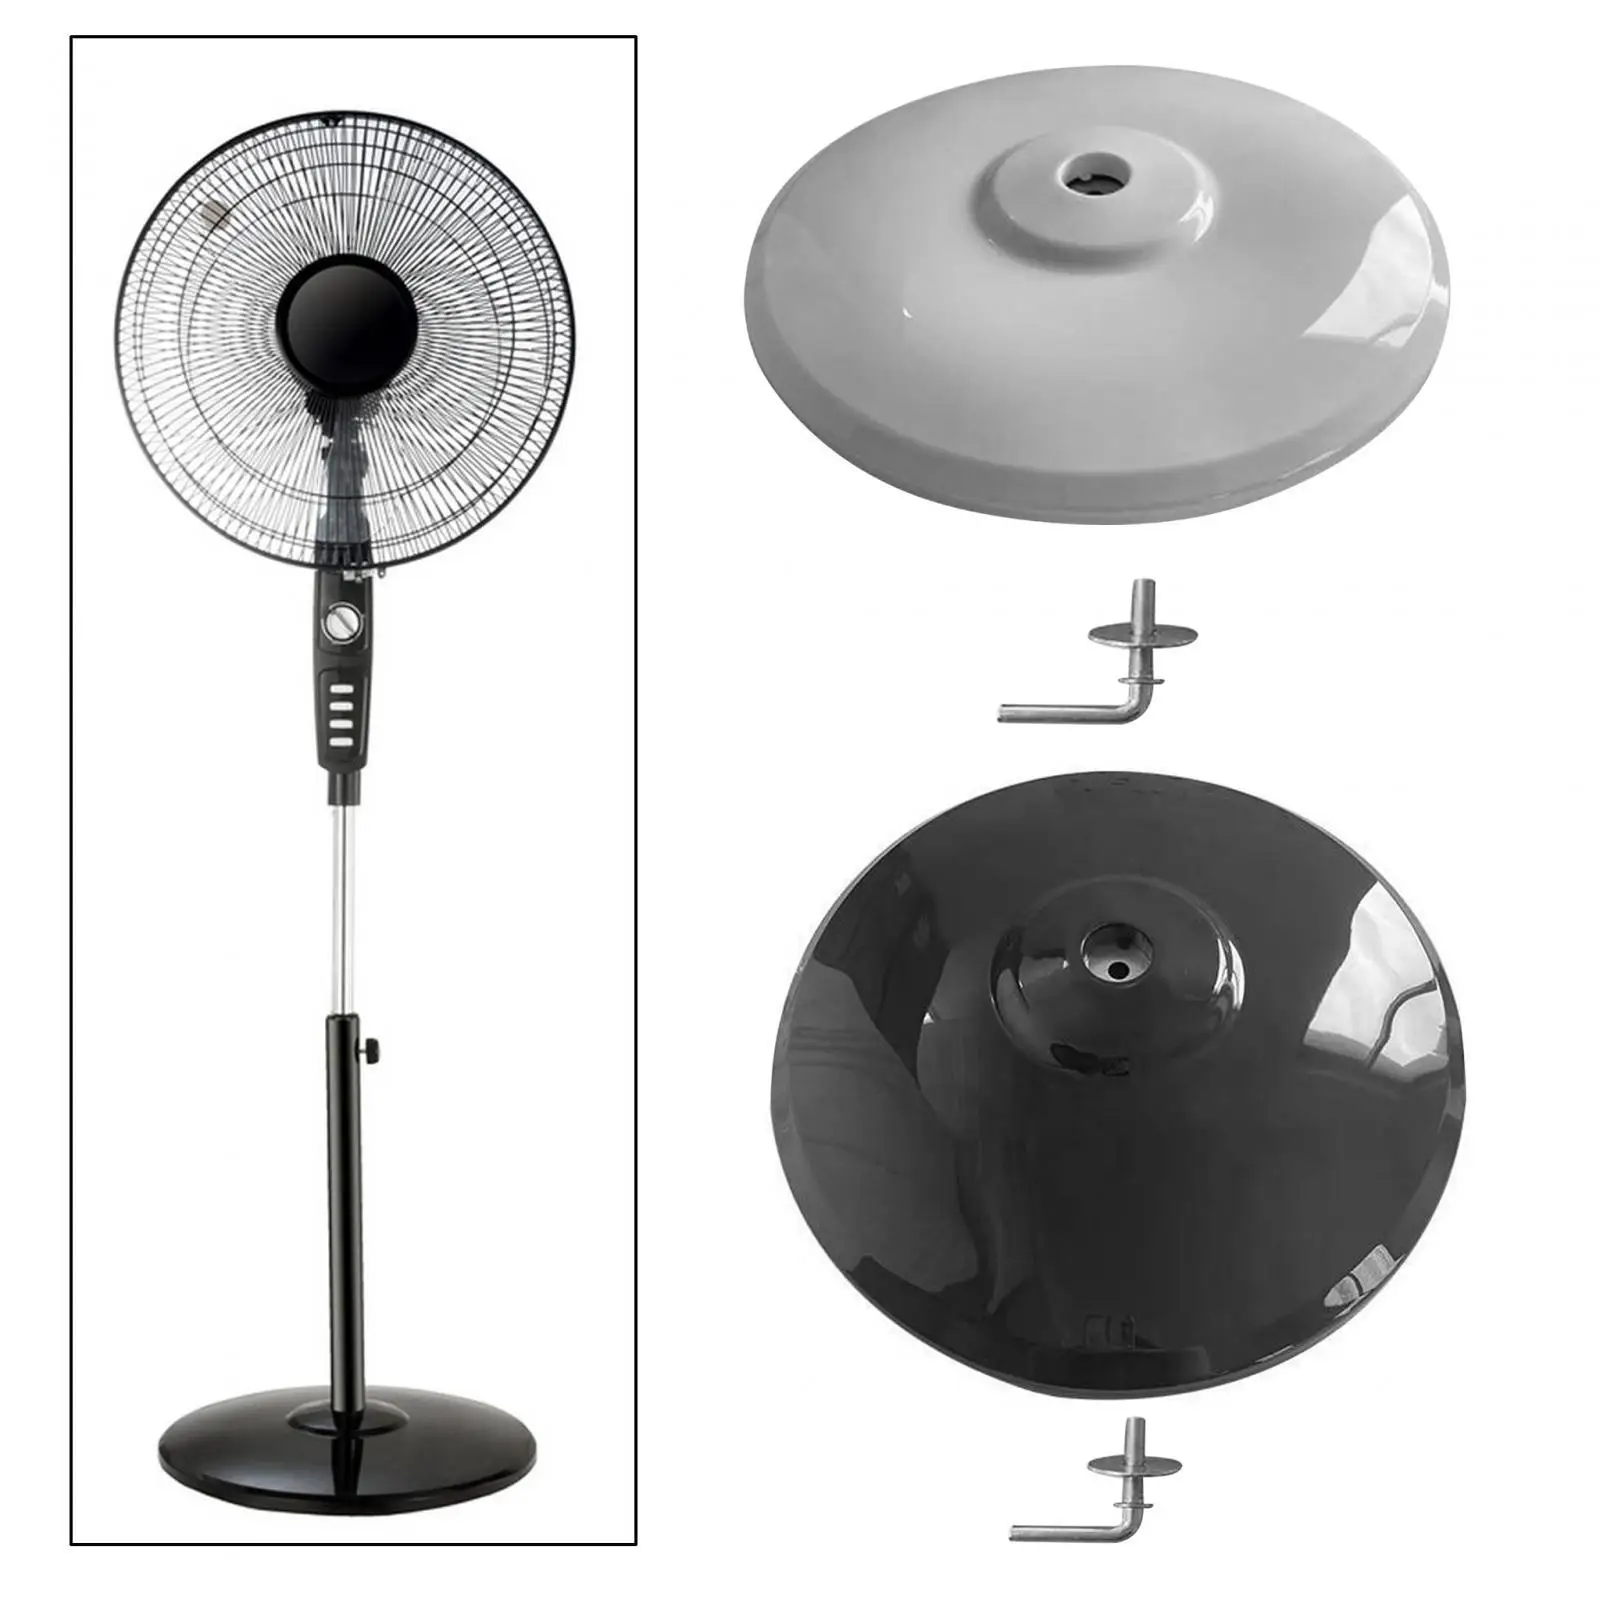 Pedestal Fan Base Portable Repair Replacement Multipurpose Oscillating Fan Chassis for Office Camping Living Room Desktop